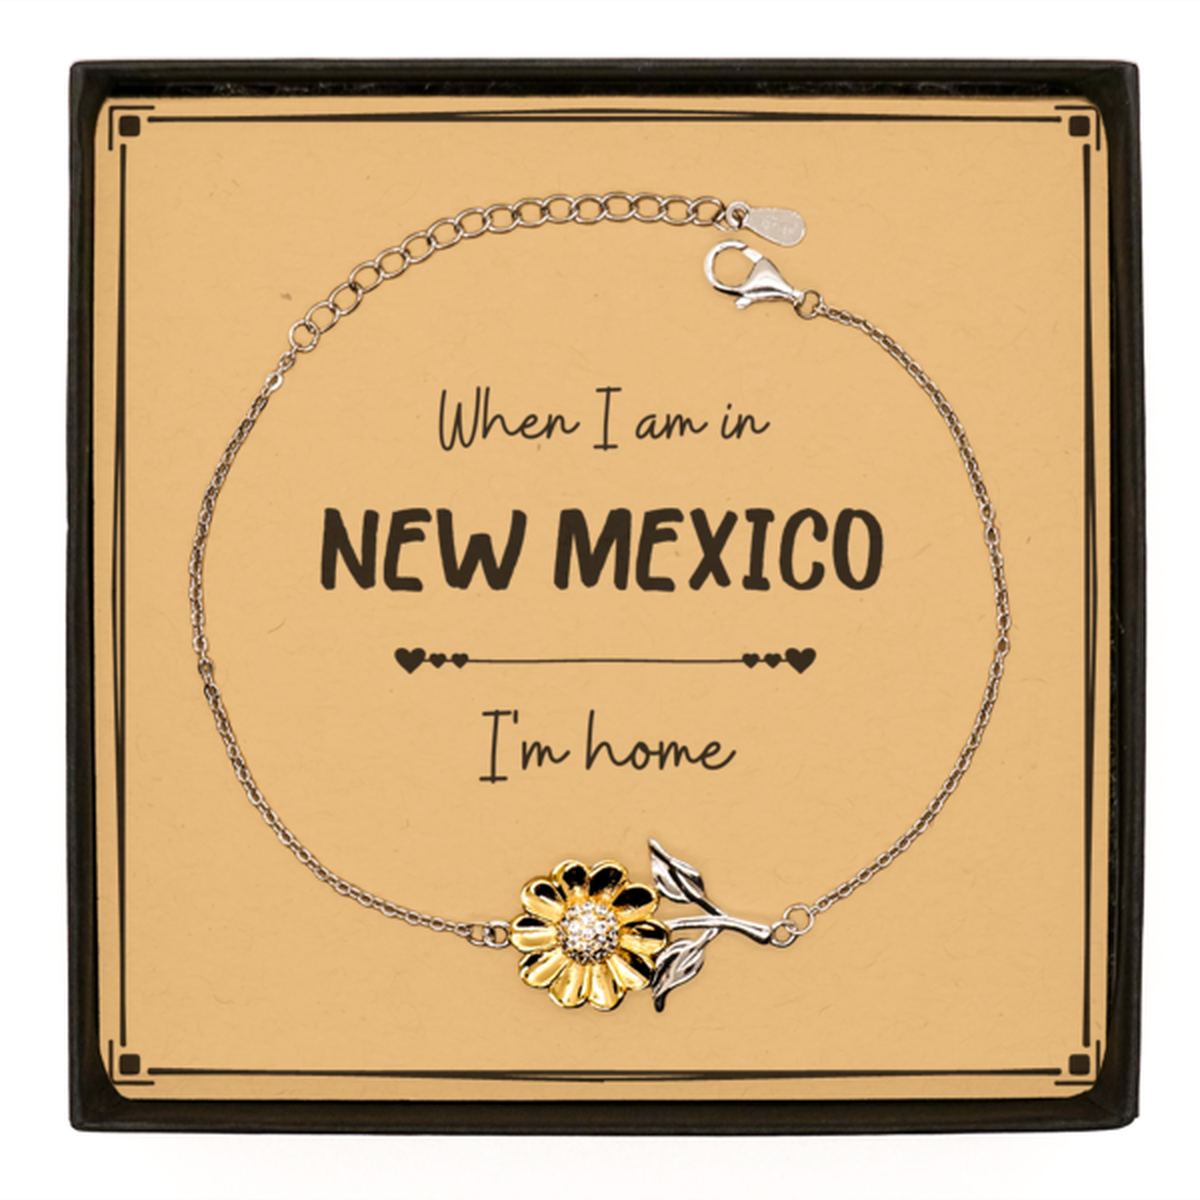 When I am in New Mexico I'm home Sunflower Bracelet, Message Card Gifts For New Mexico, State New Mexico Birthday Gifts for Friends Coworker